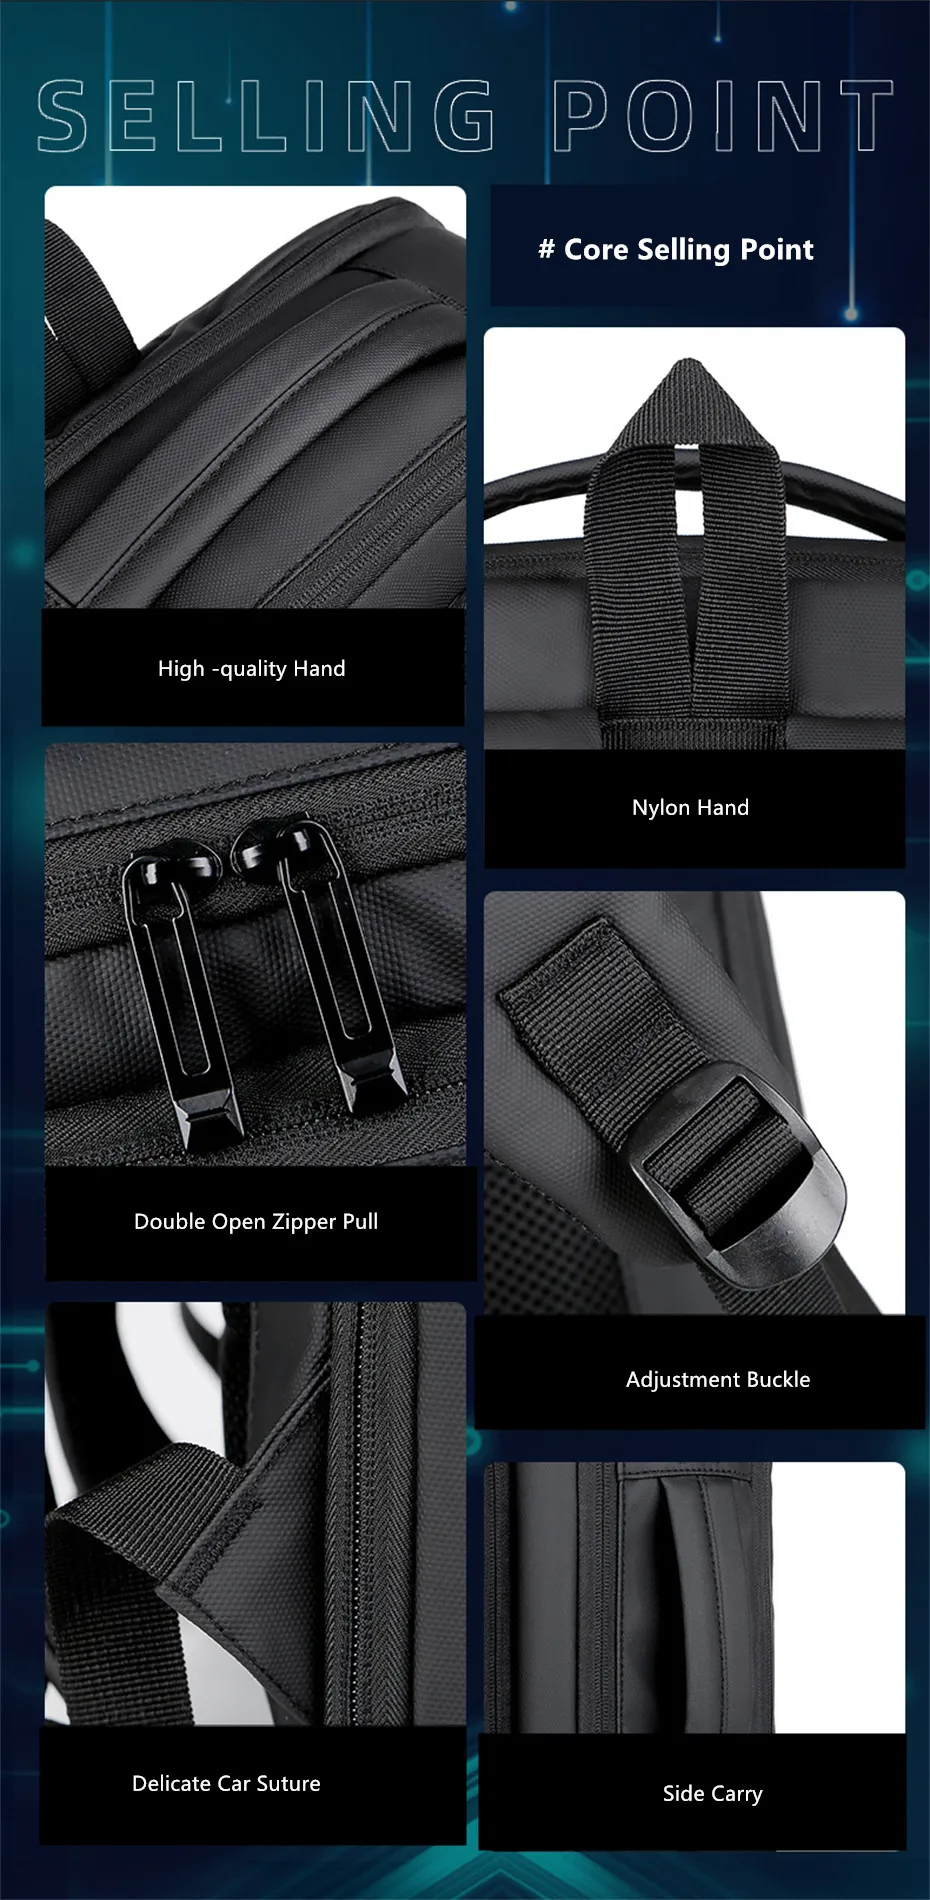 Backpack With Usb Charger, High Quality - Jeep Buluo